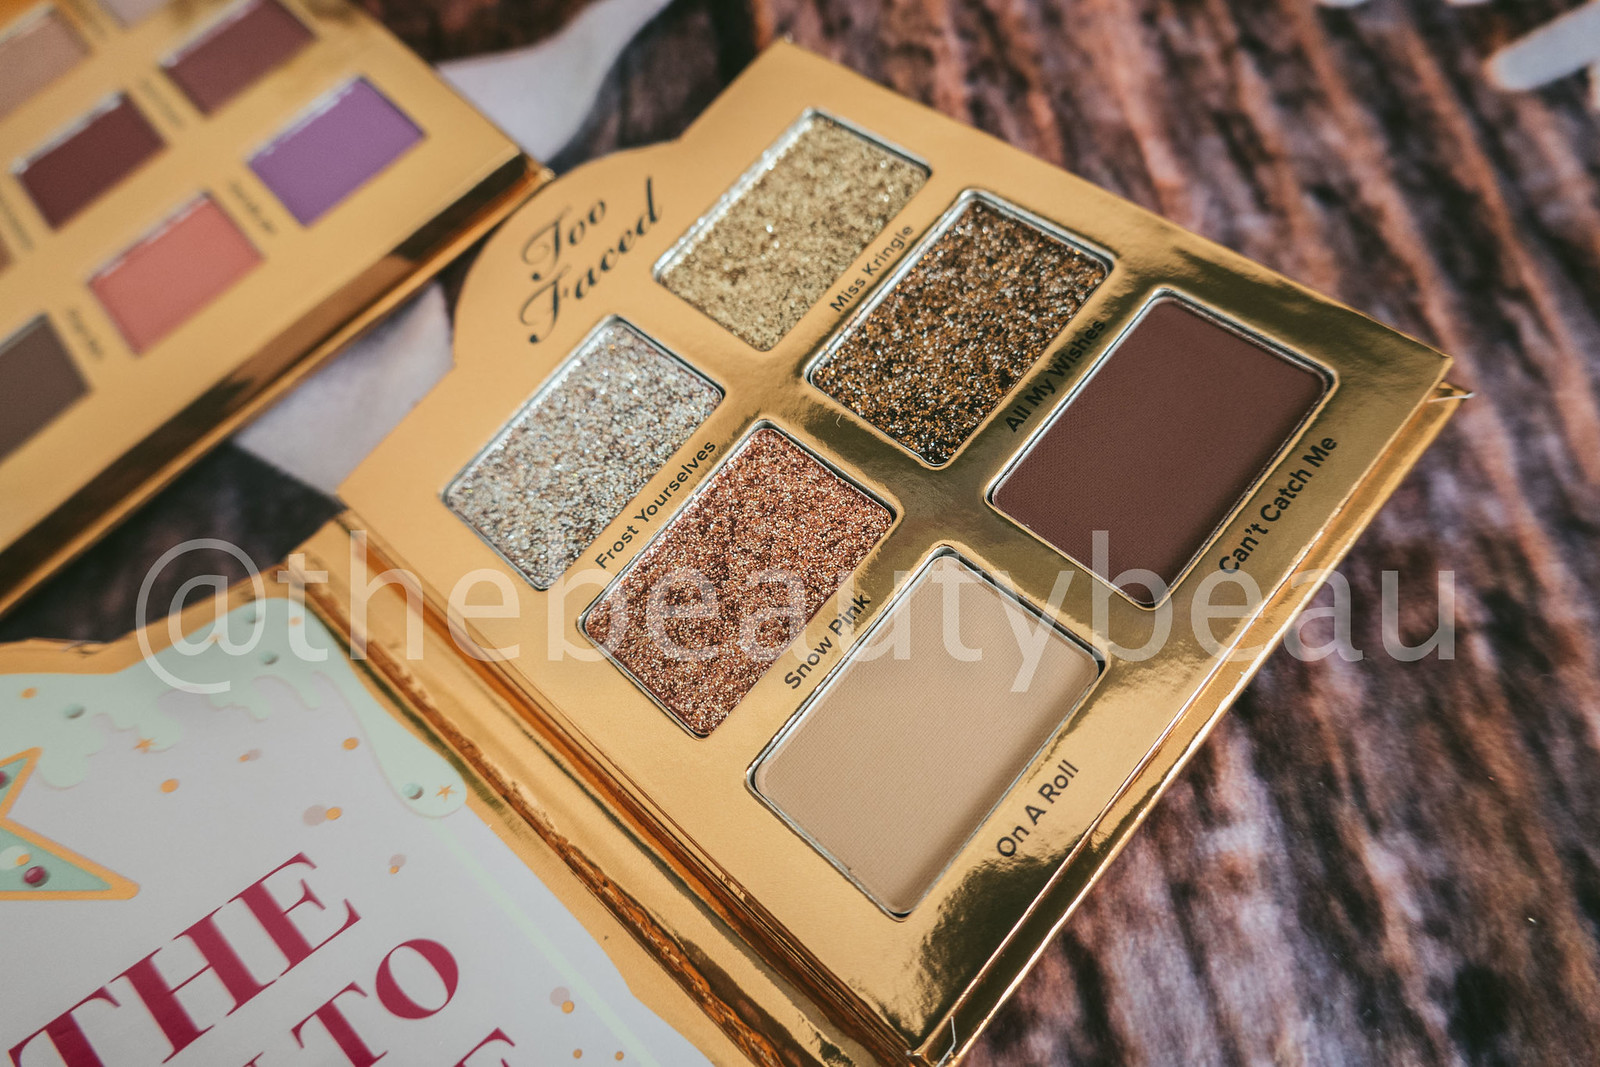 too faced Christmas cookie house party collection